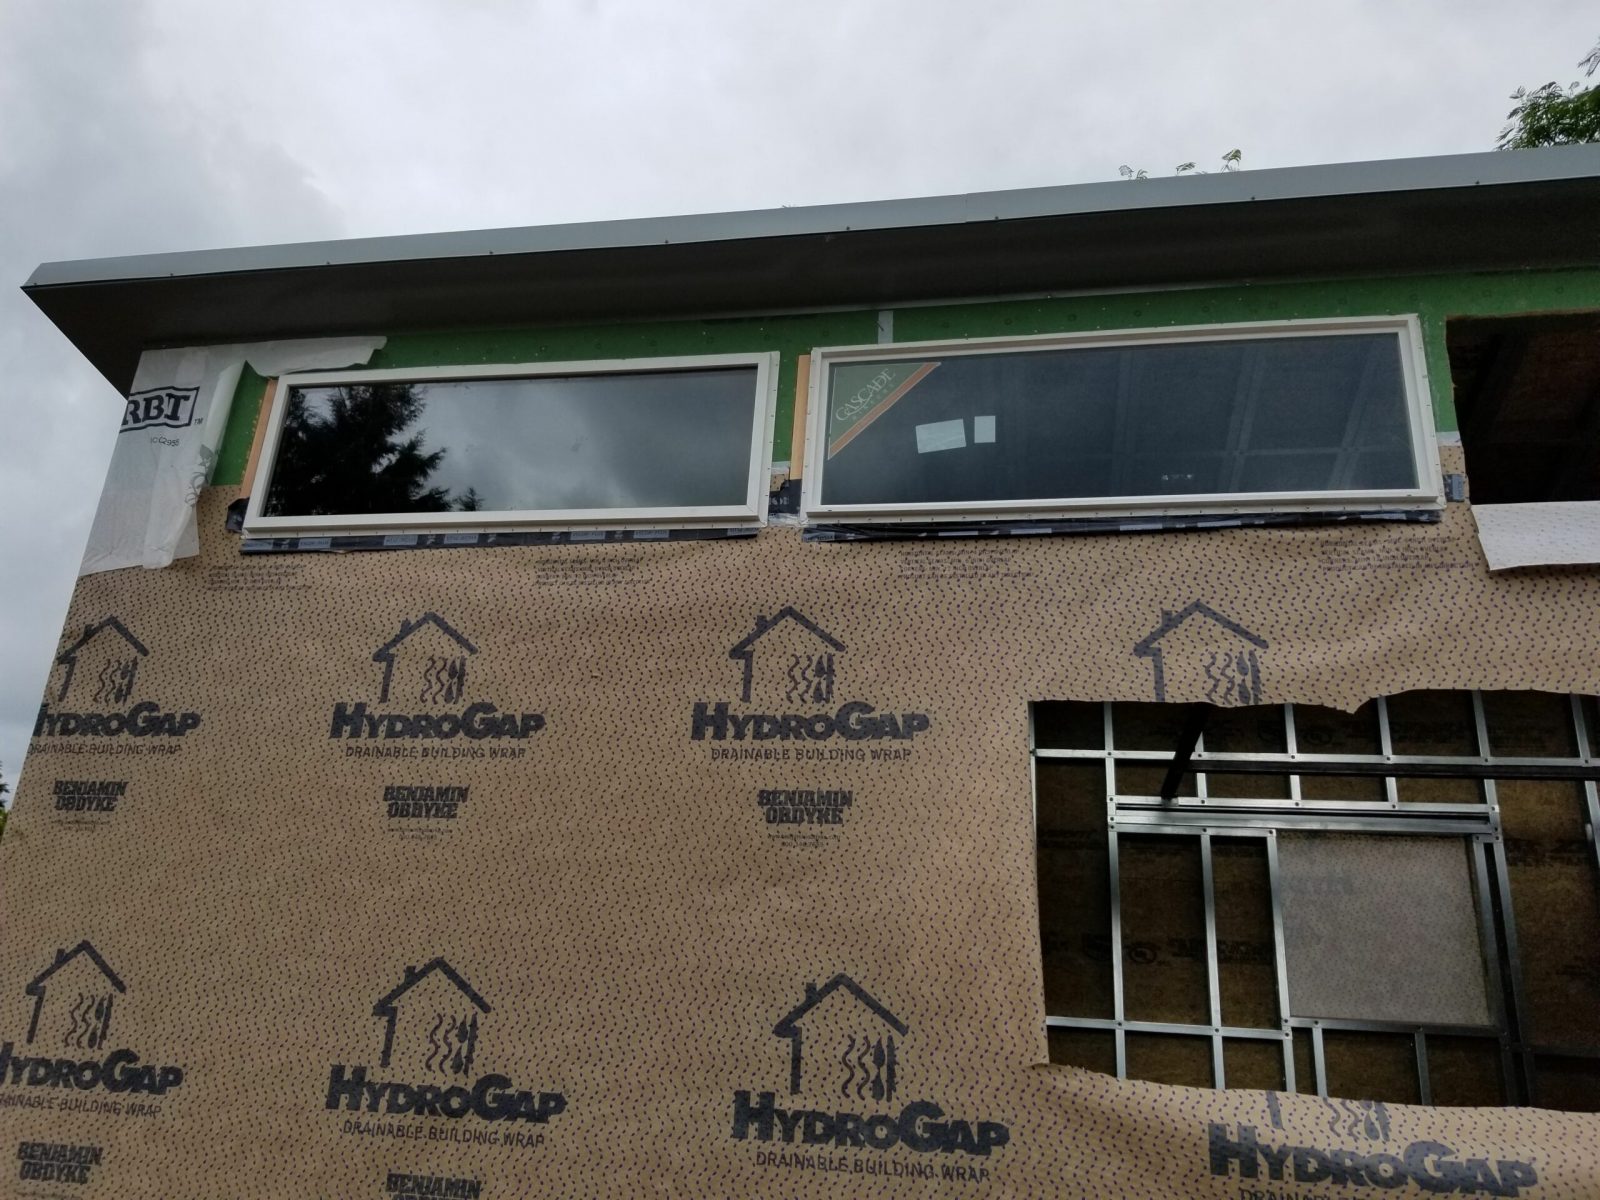 Installing the upper 2'x6' picture windows